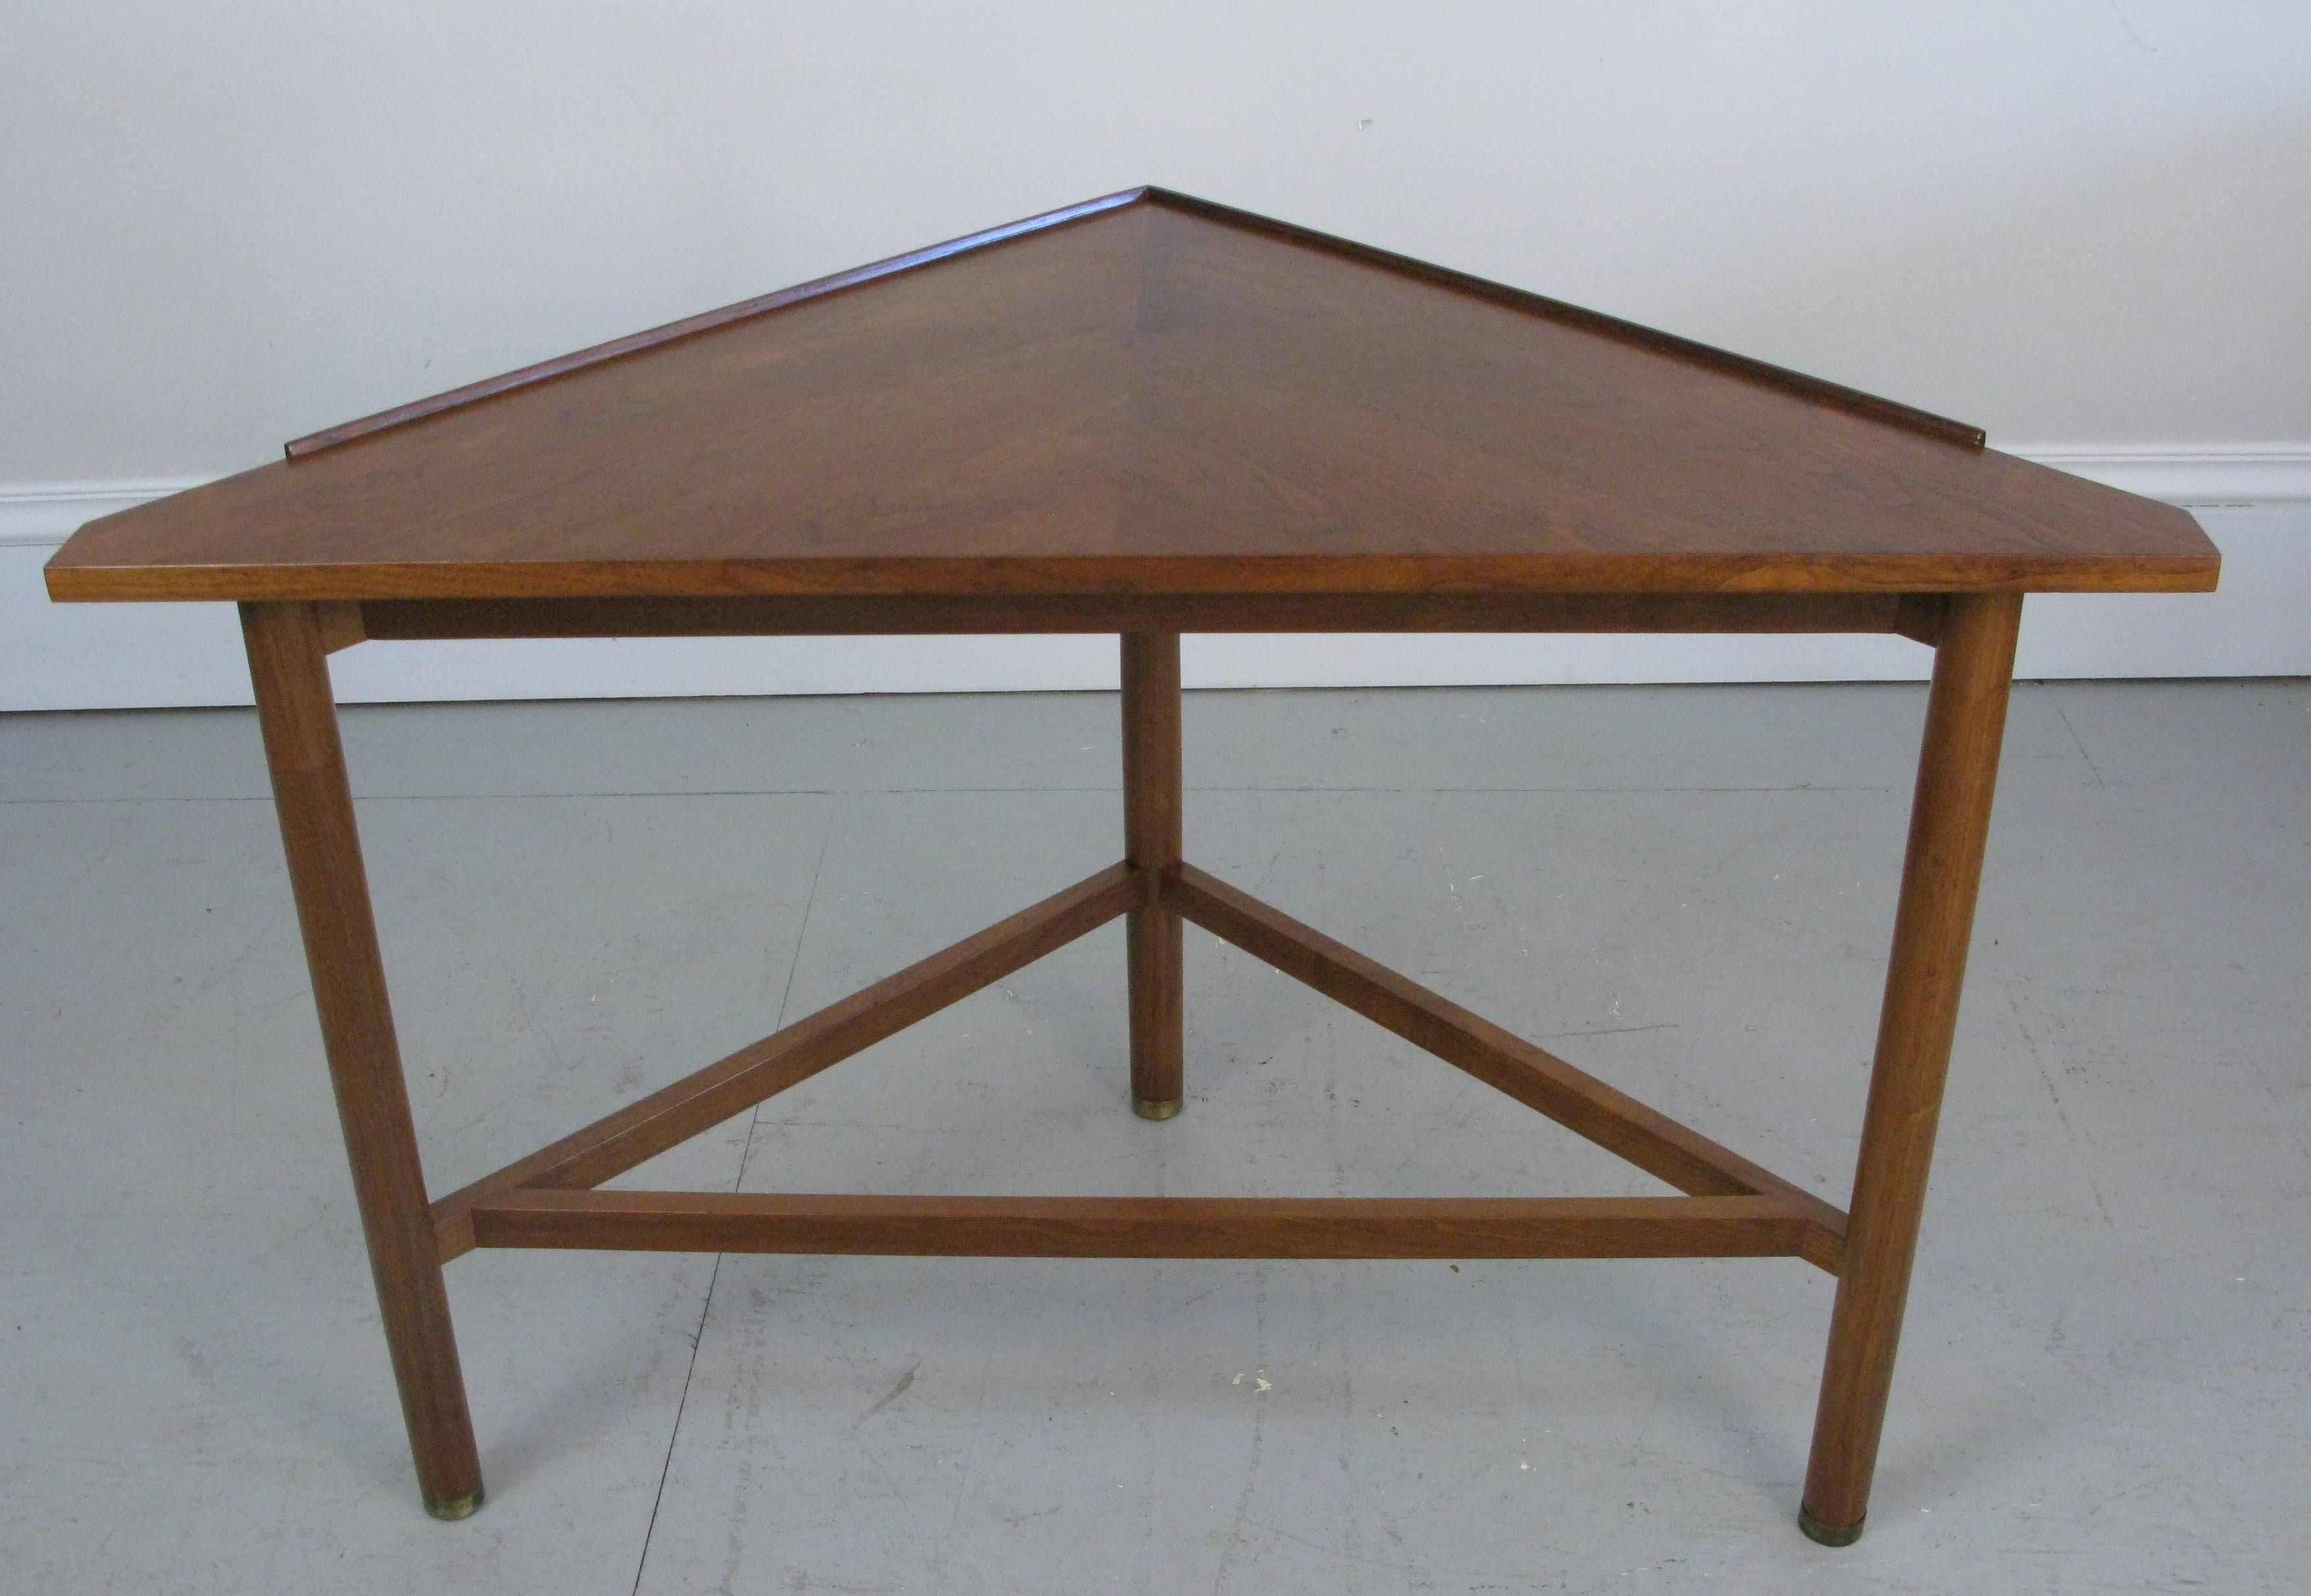 A 1950s well thought out geometric triangle console table by Edward Wormley for Dunbar. Raised edge and beautiful walnut. Ended in brass footing. Table has been newly finished.